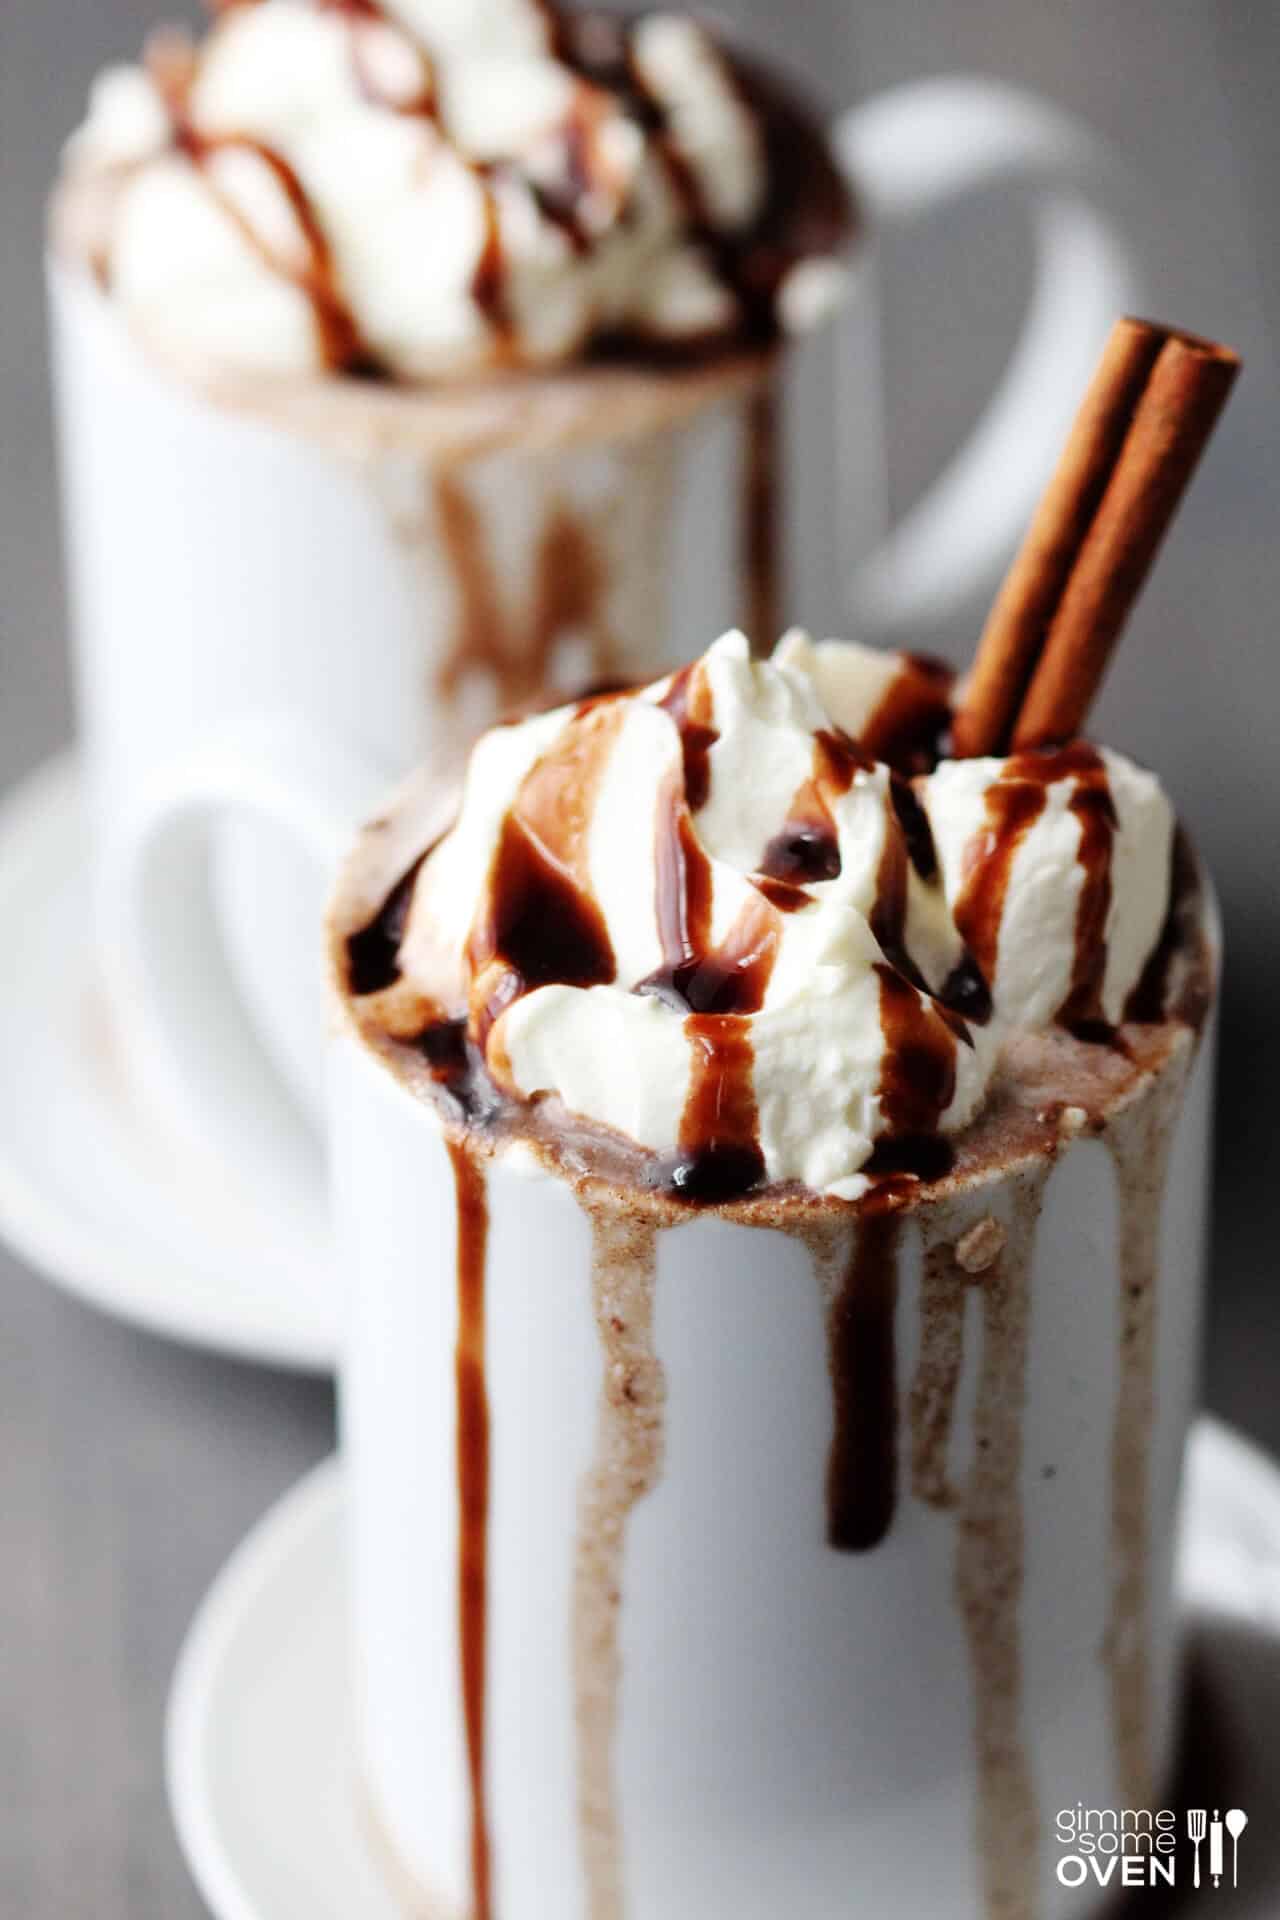 Mexican spiced hot chocolate